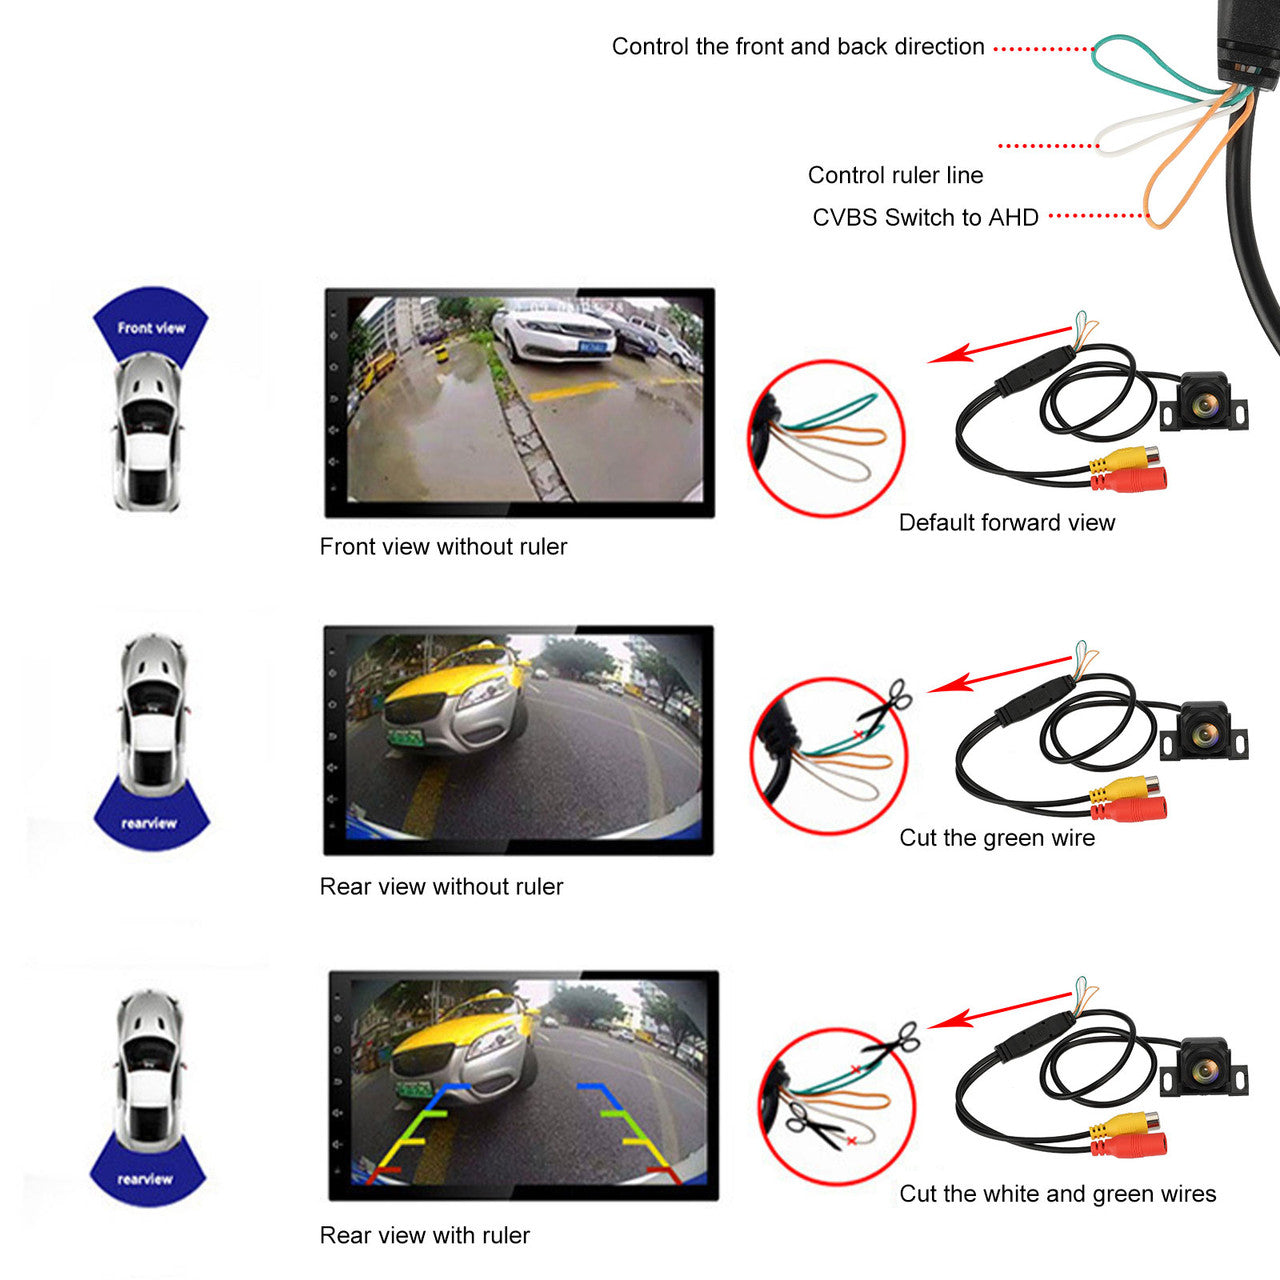 Car Rear View Backup Camera, 170掳 View Angle Car Front Side Rear View Fish-eye Len Camera, Universal Waterproof Backup Parking Camera with Scale Lines for 12V Cars SUV Pickup Truck Van